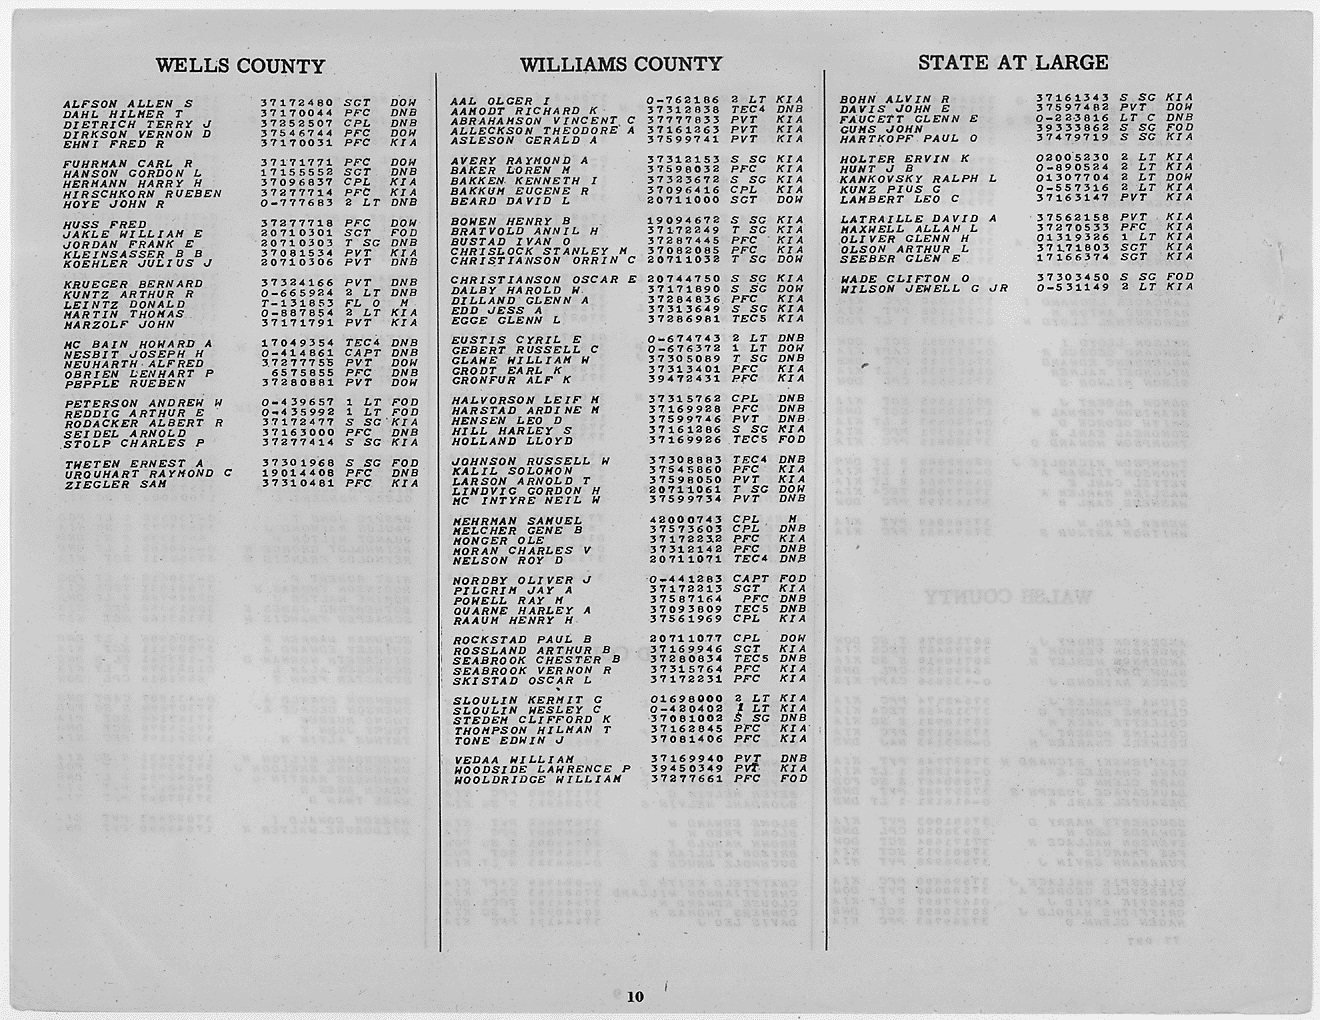 Official deathlist  Williams County WOODSIDE LAWRENCE P